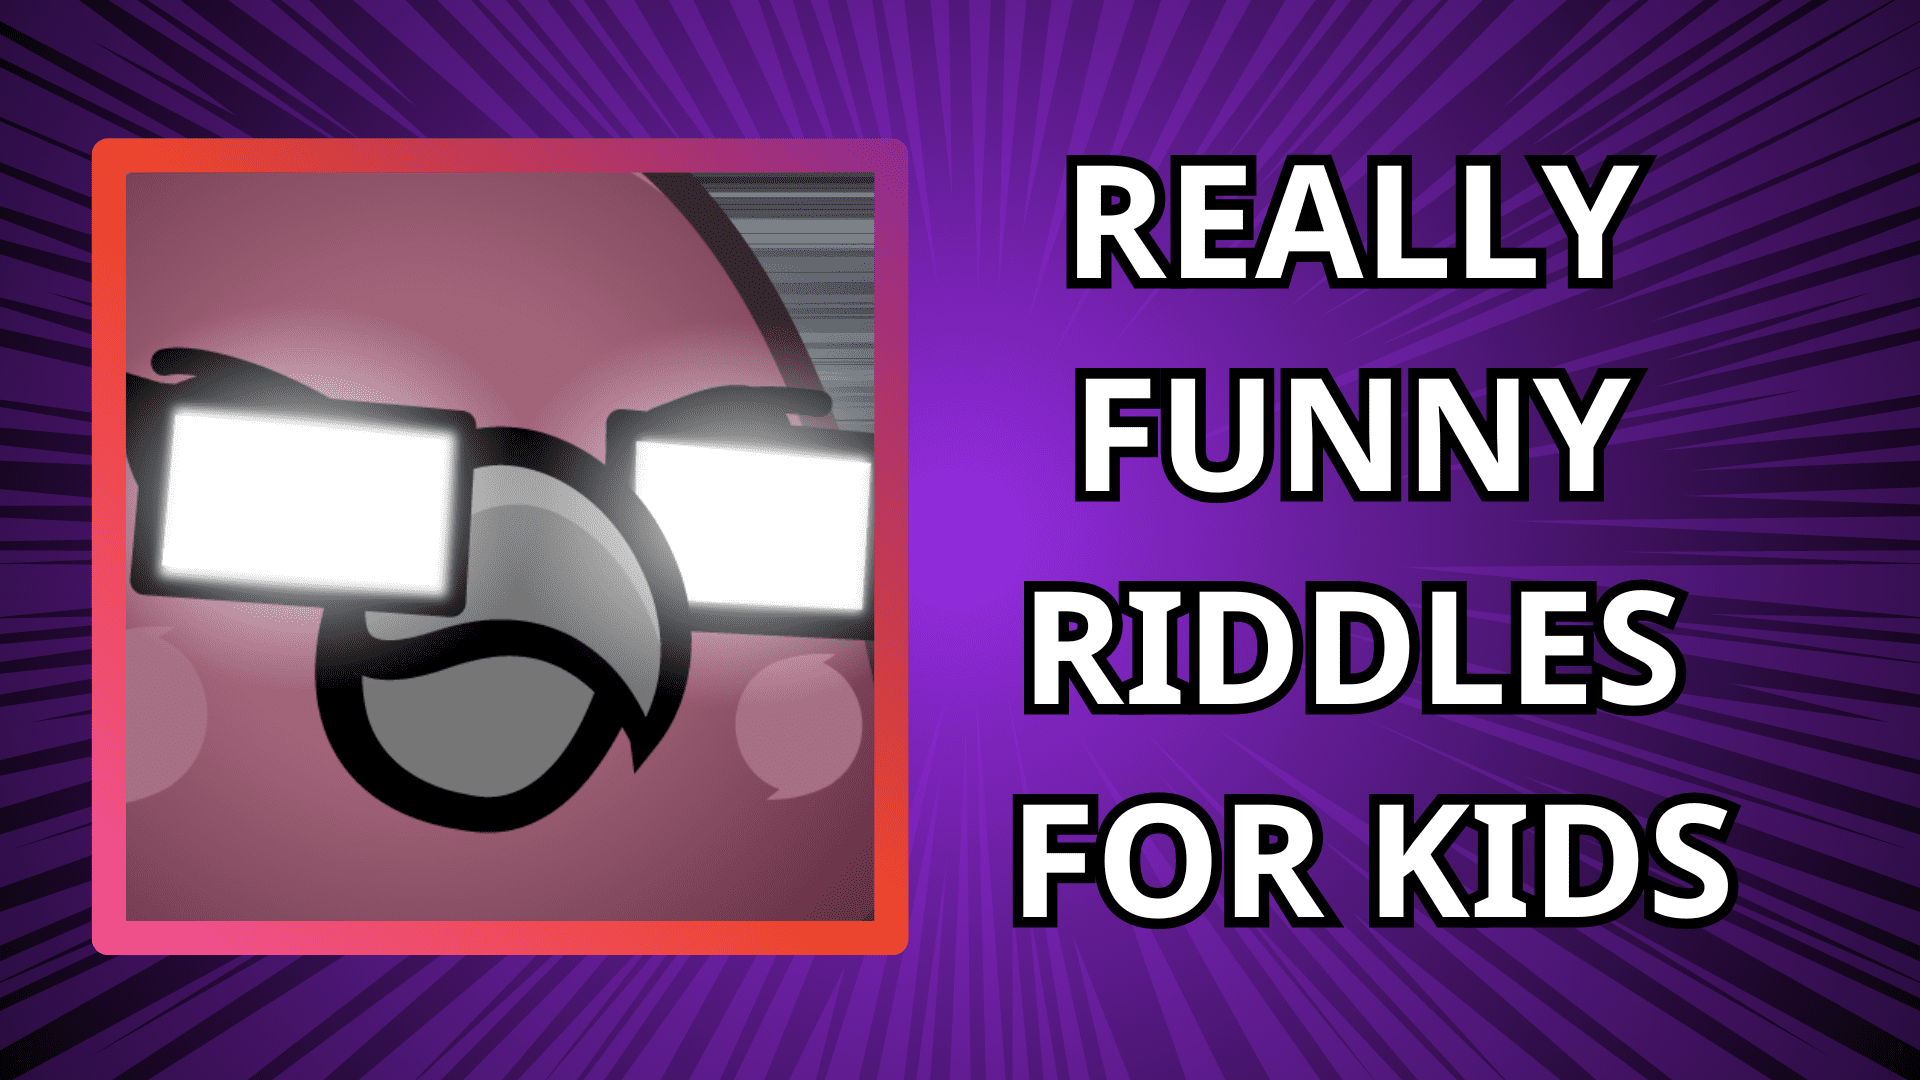 10 Really Funny Riddles for Kids